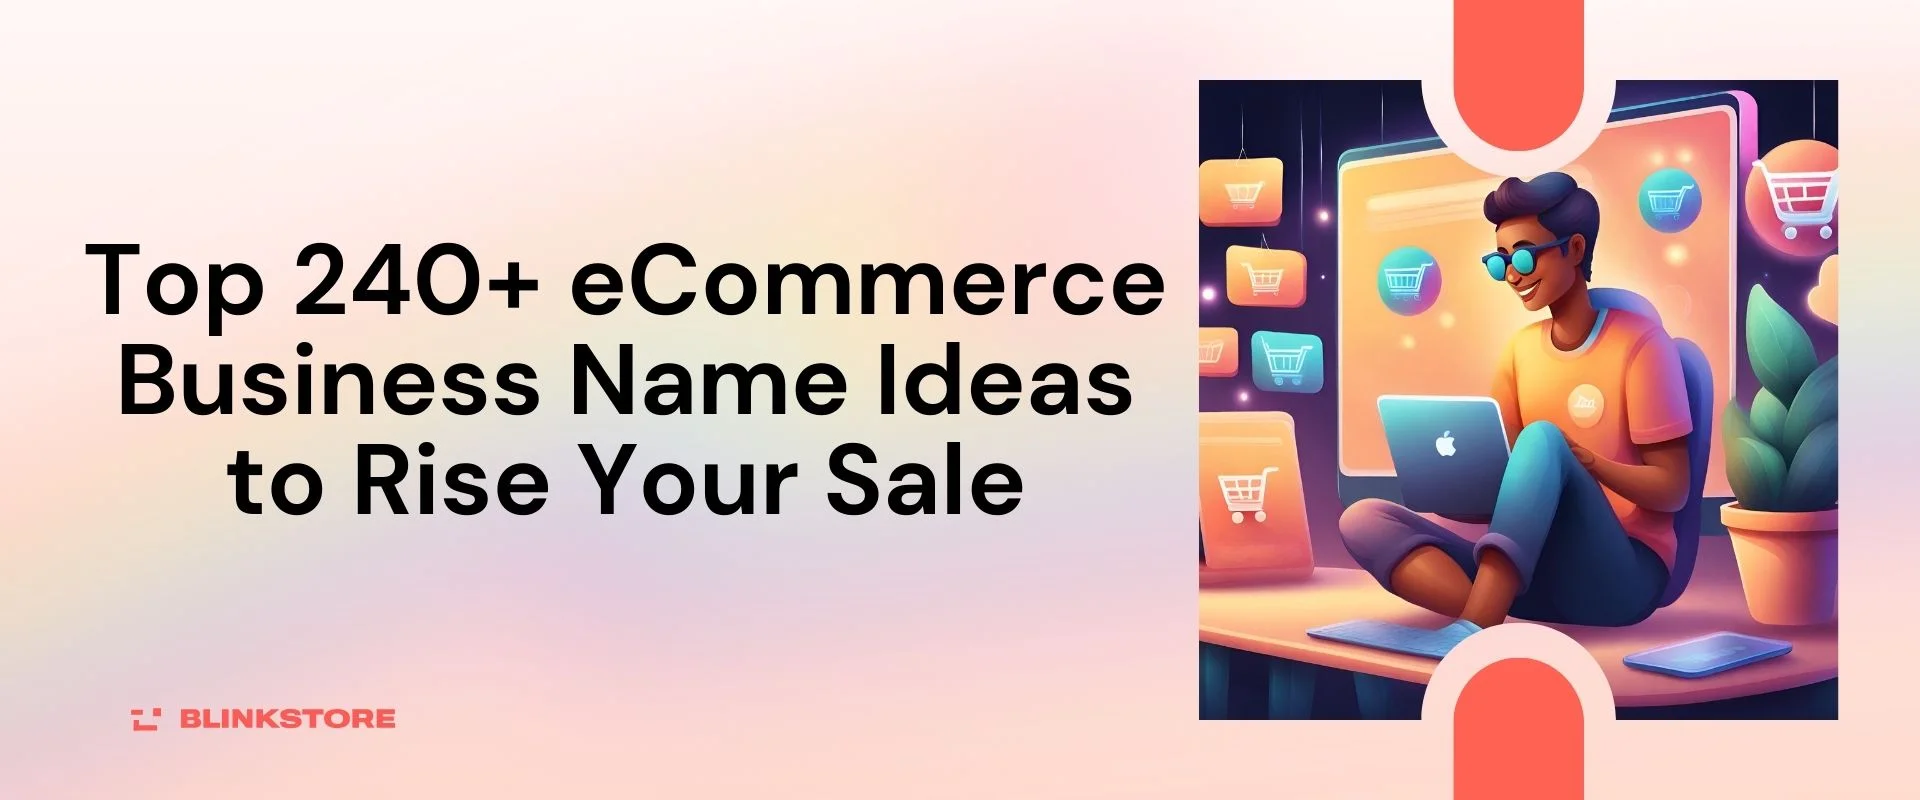 Top 240+ eCommerce Business Name Ideas to Rise Your Sale